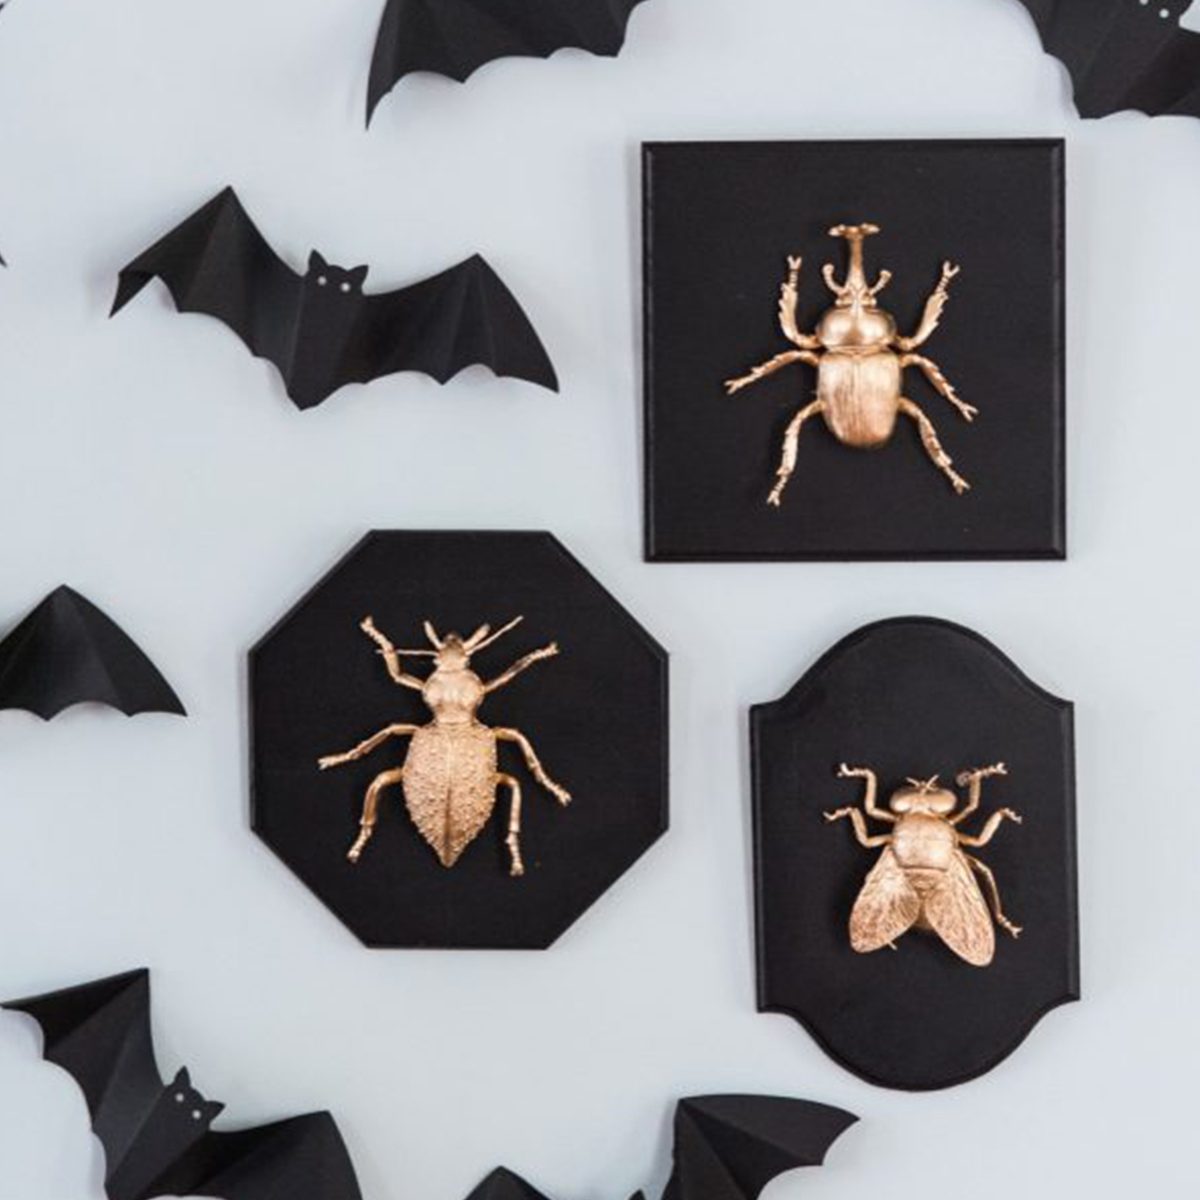 Golden Insect Taxidermy Plates Via Thesweetestoccasion